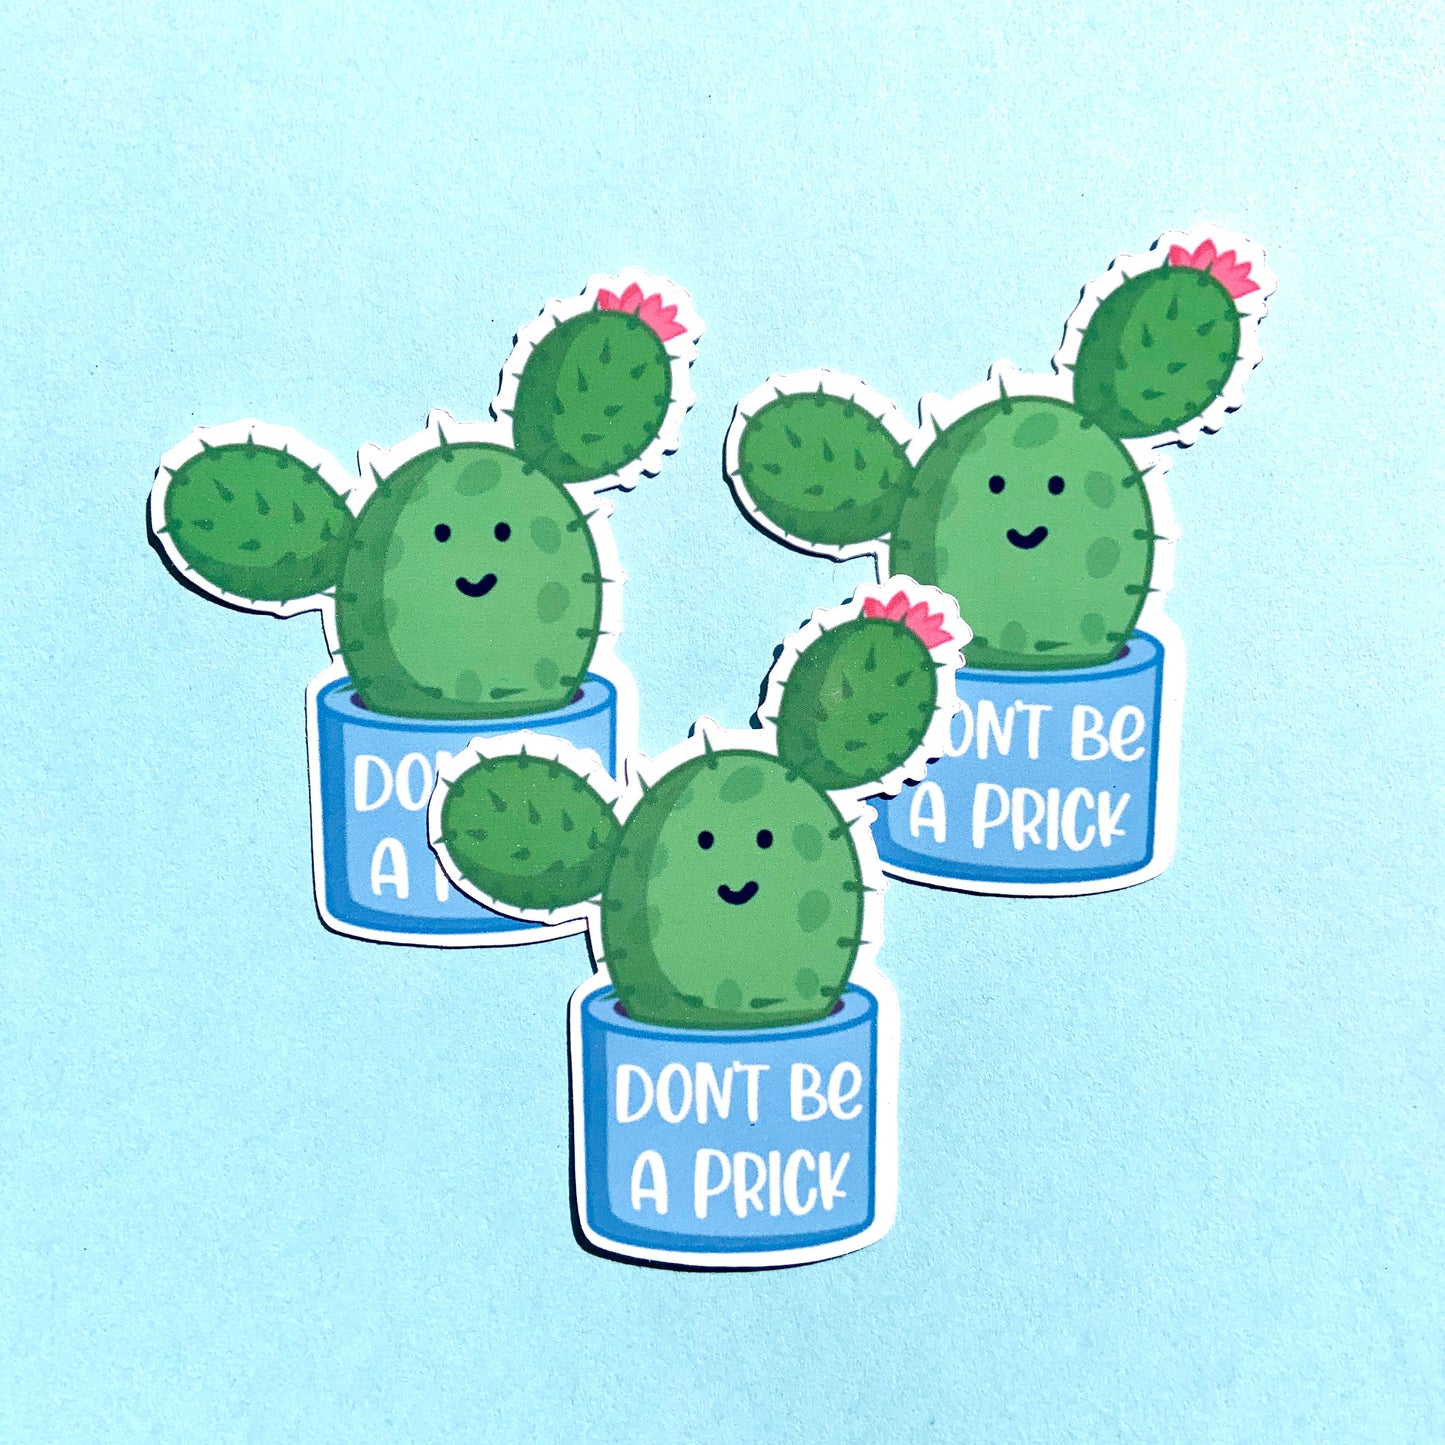 Don’t be a prick